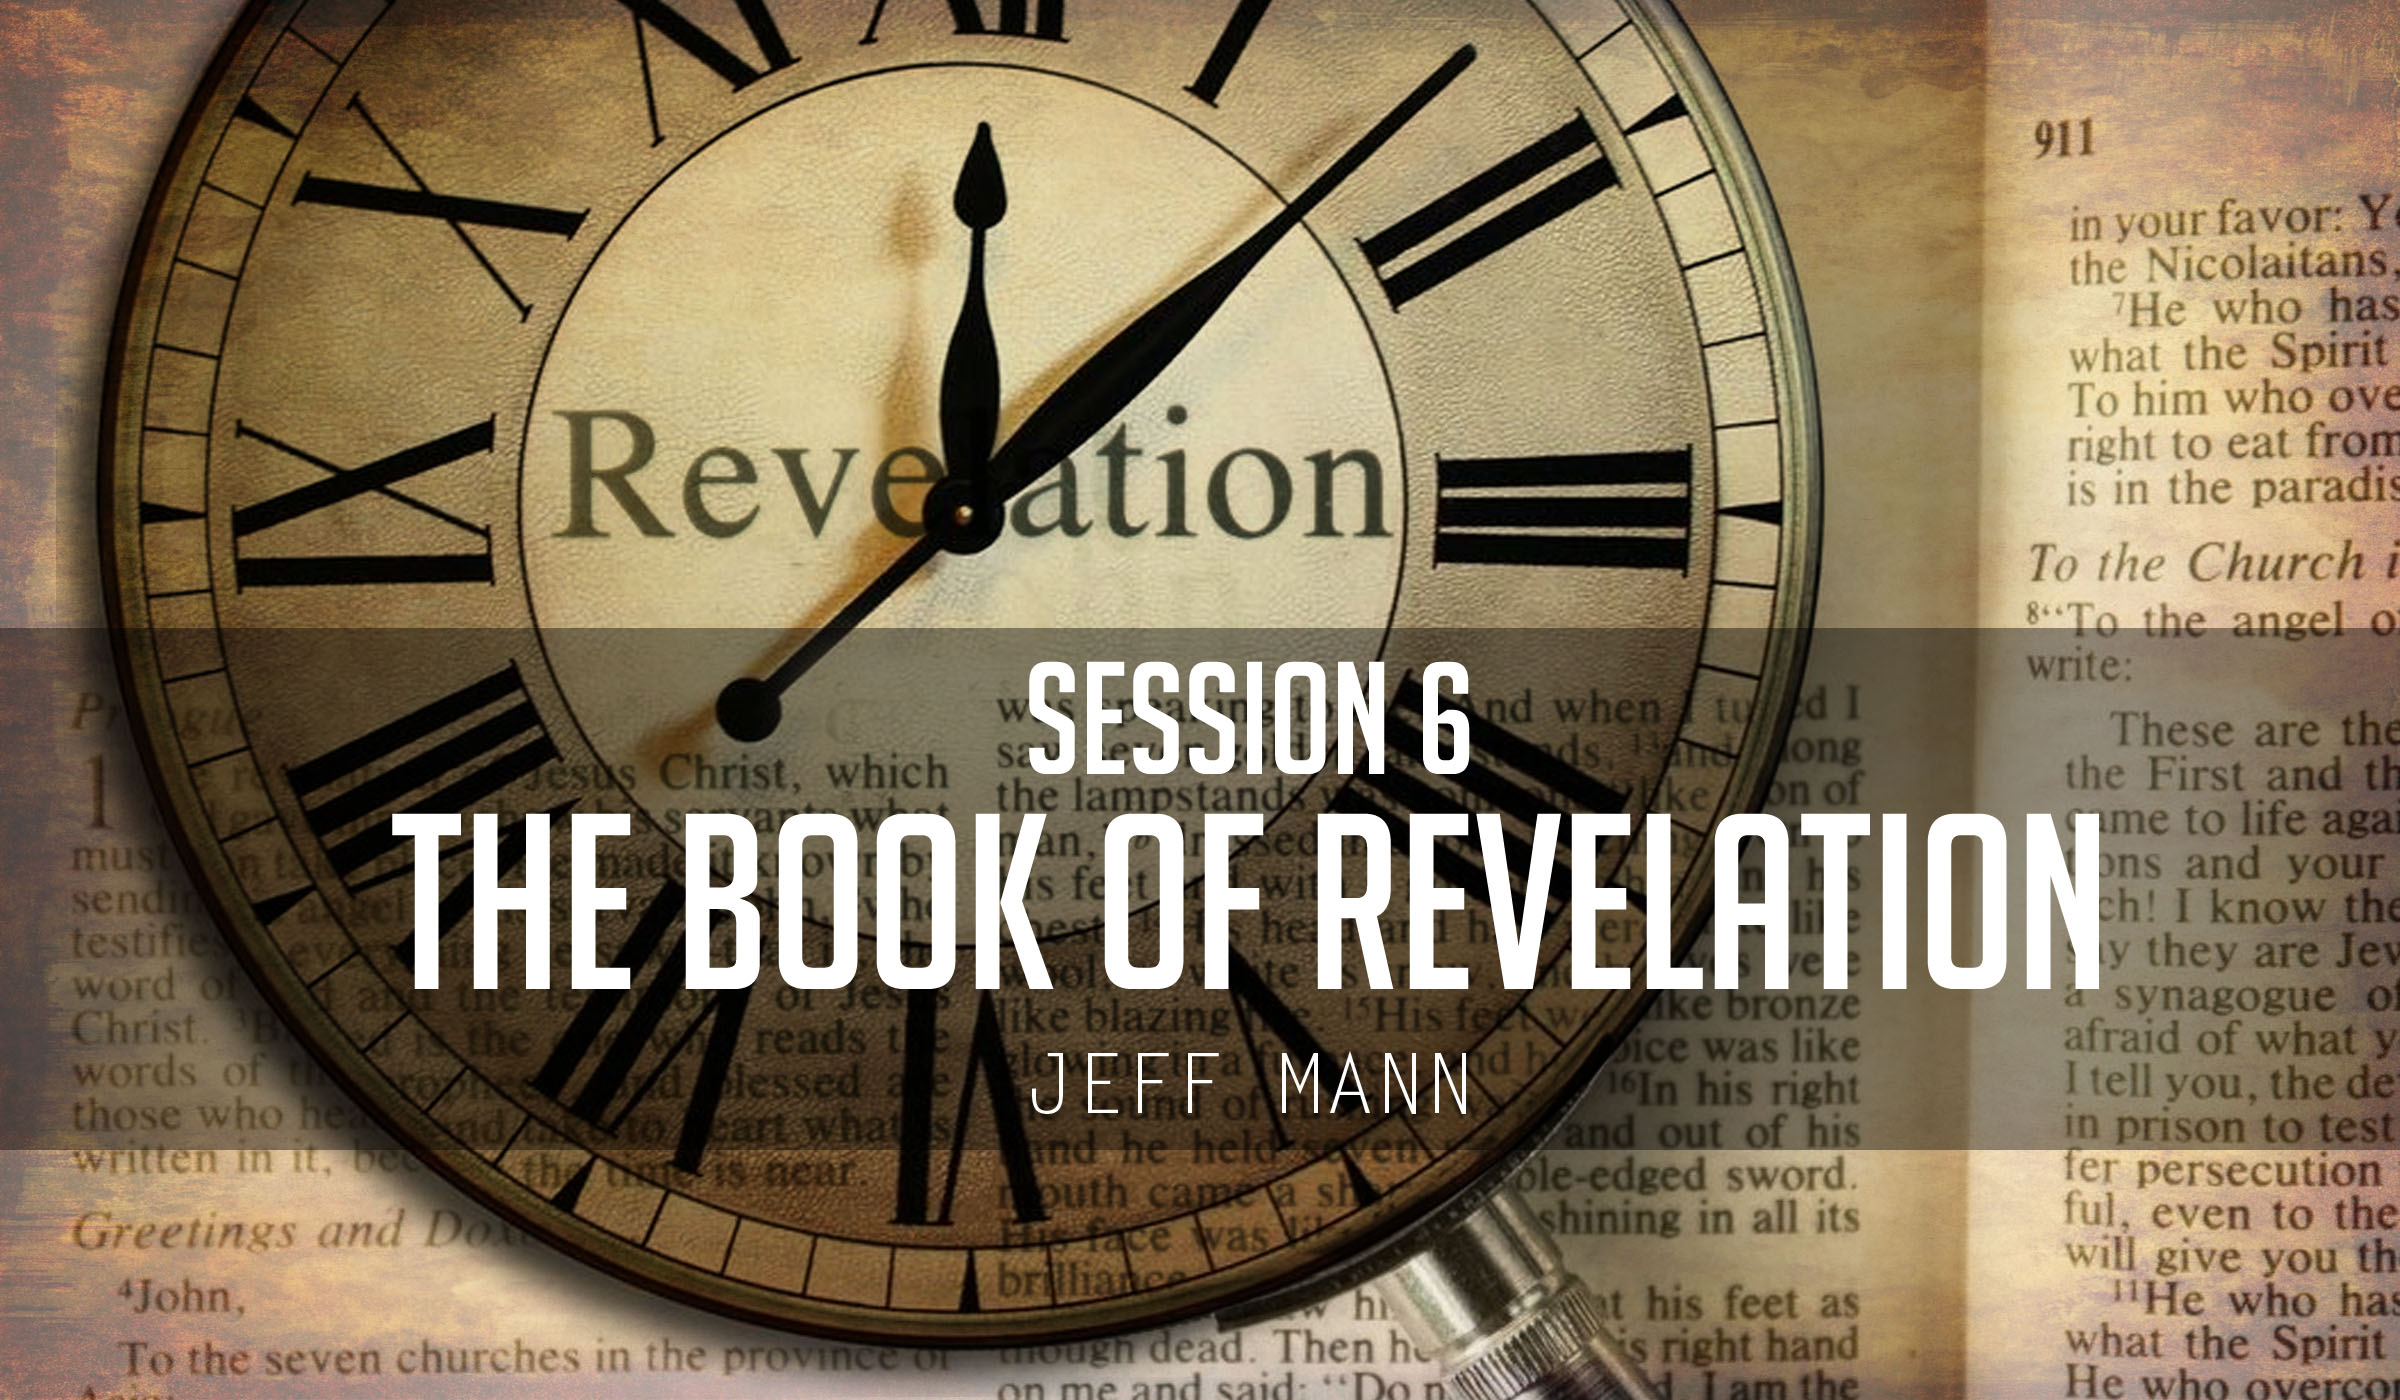 The Book of Revelation Session 6